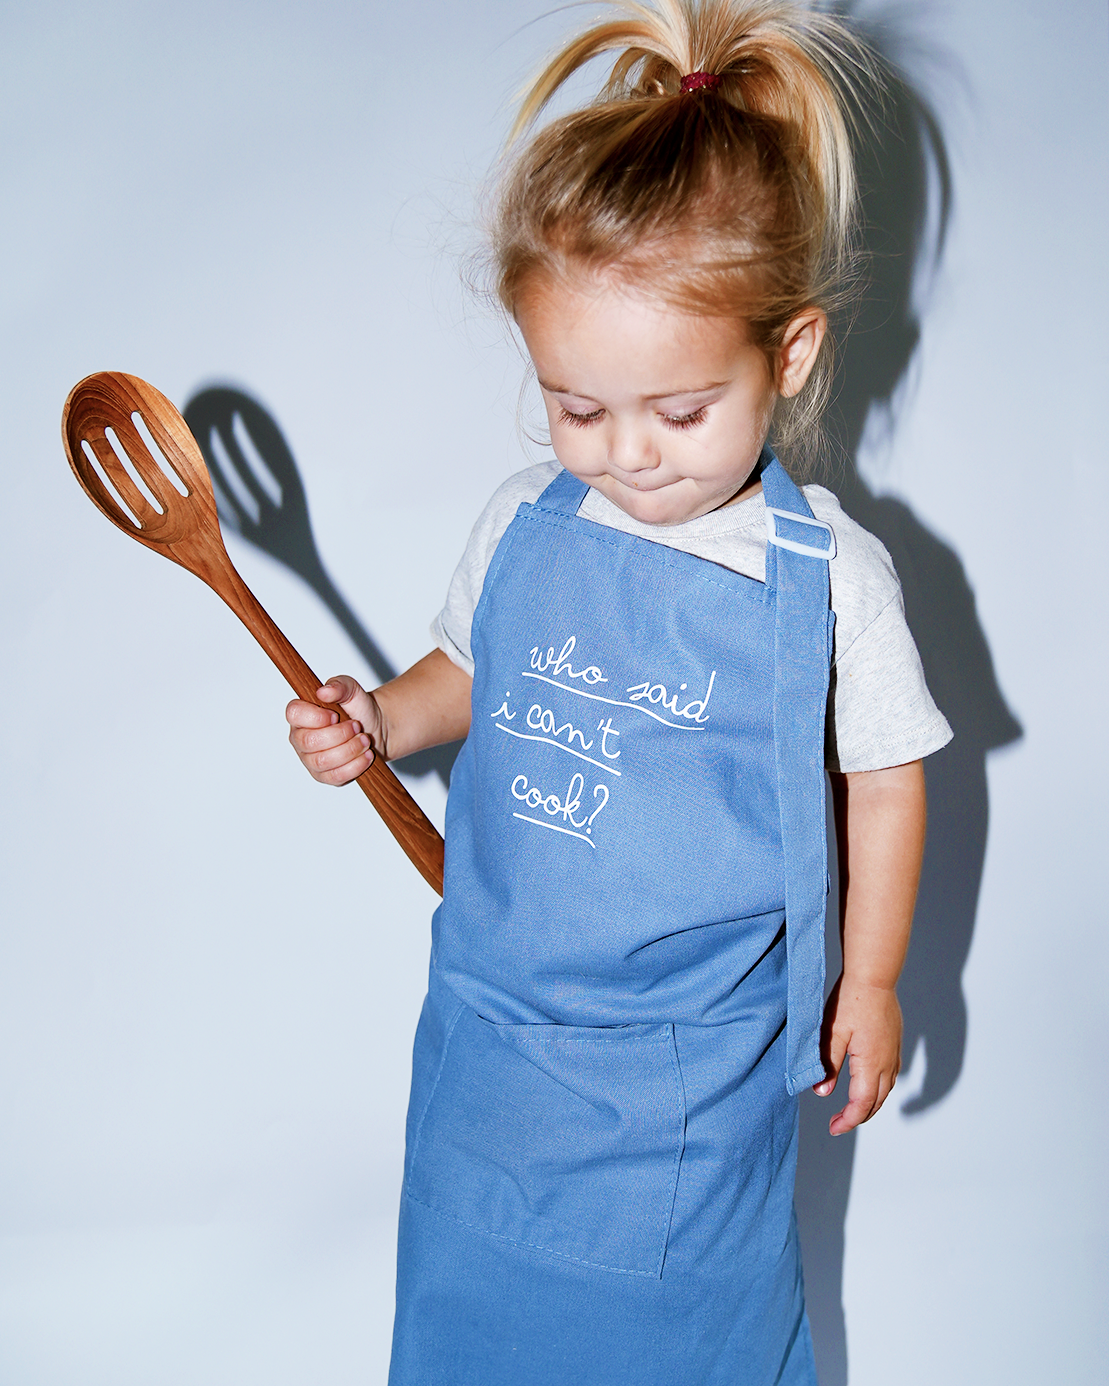 Little Chef 84 Piece Complete Party Pack ($250 Value)84 piece party pack!  Perfect for a 12 person party!
From the tiniest chef in training to the culinary master, the most important party trick is using the best ingrePOP party suppliesChef 84 Piece Complete Party Pack ($250